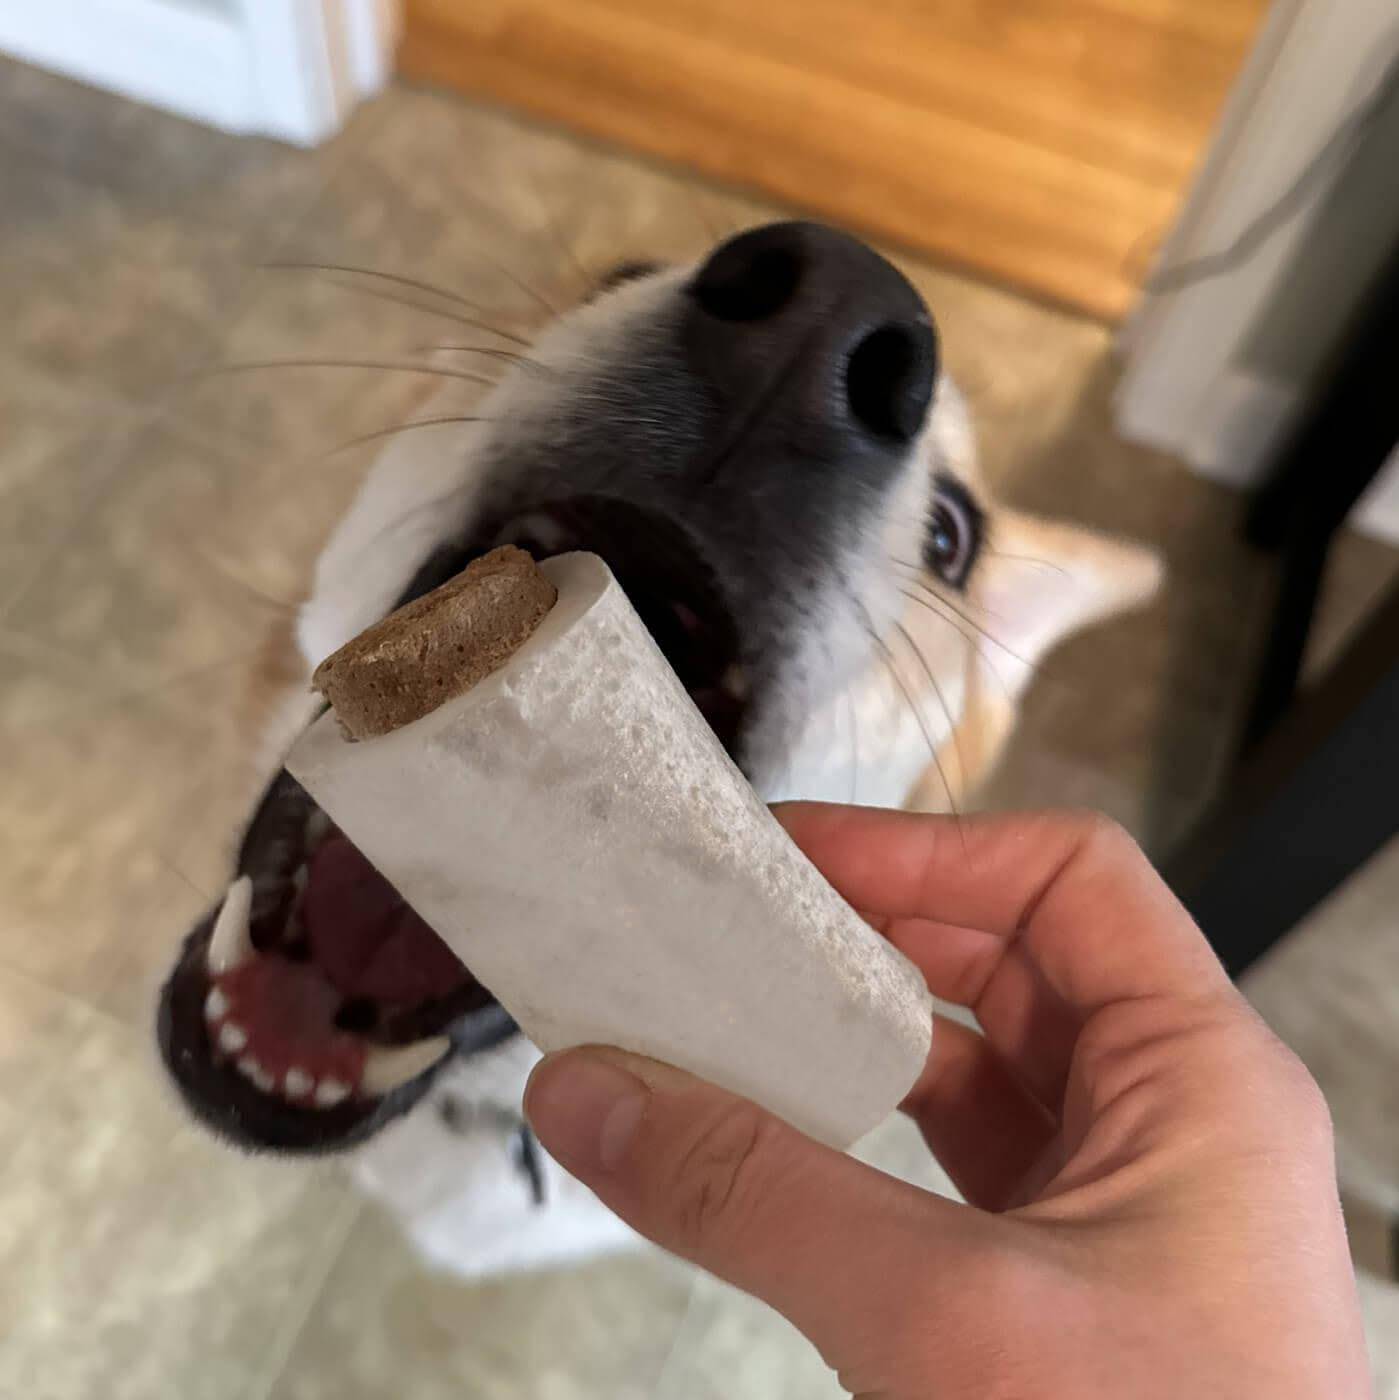 Dog with open mouth about to bite into a marow bone filled with a freeze-dried treat.